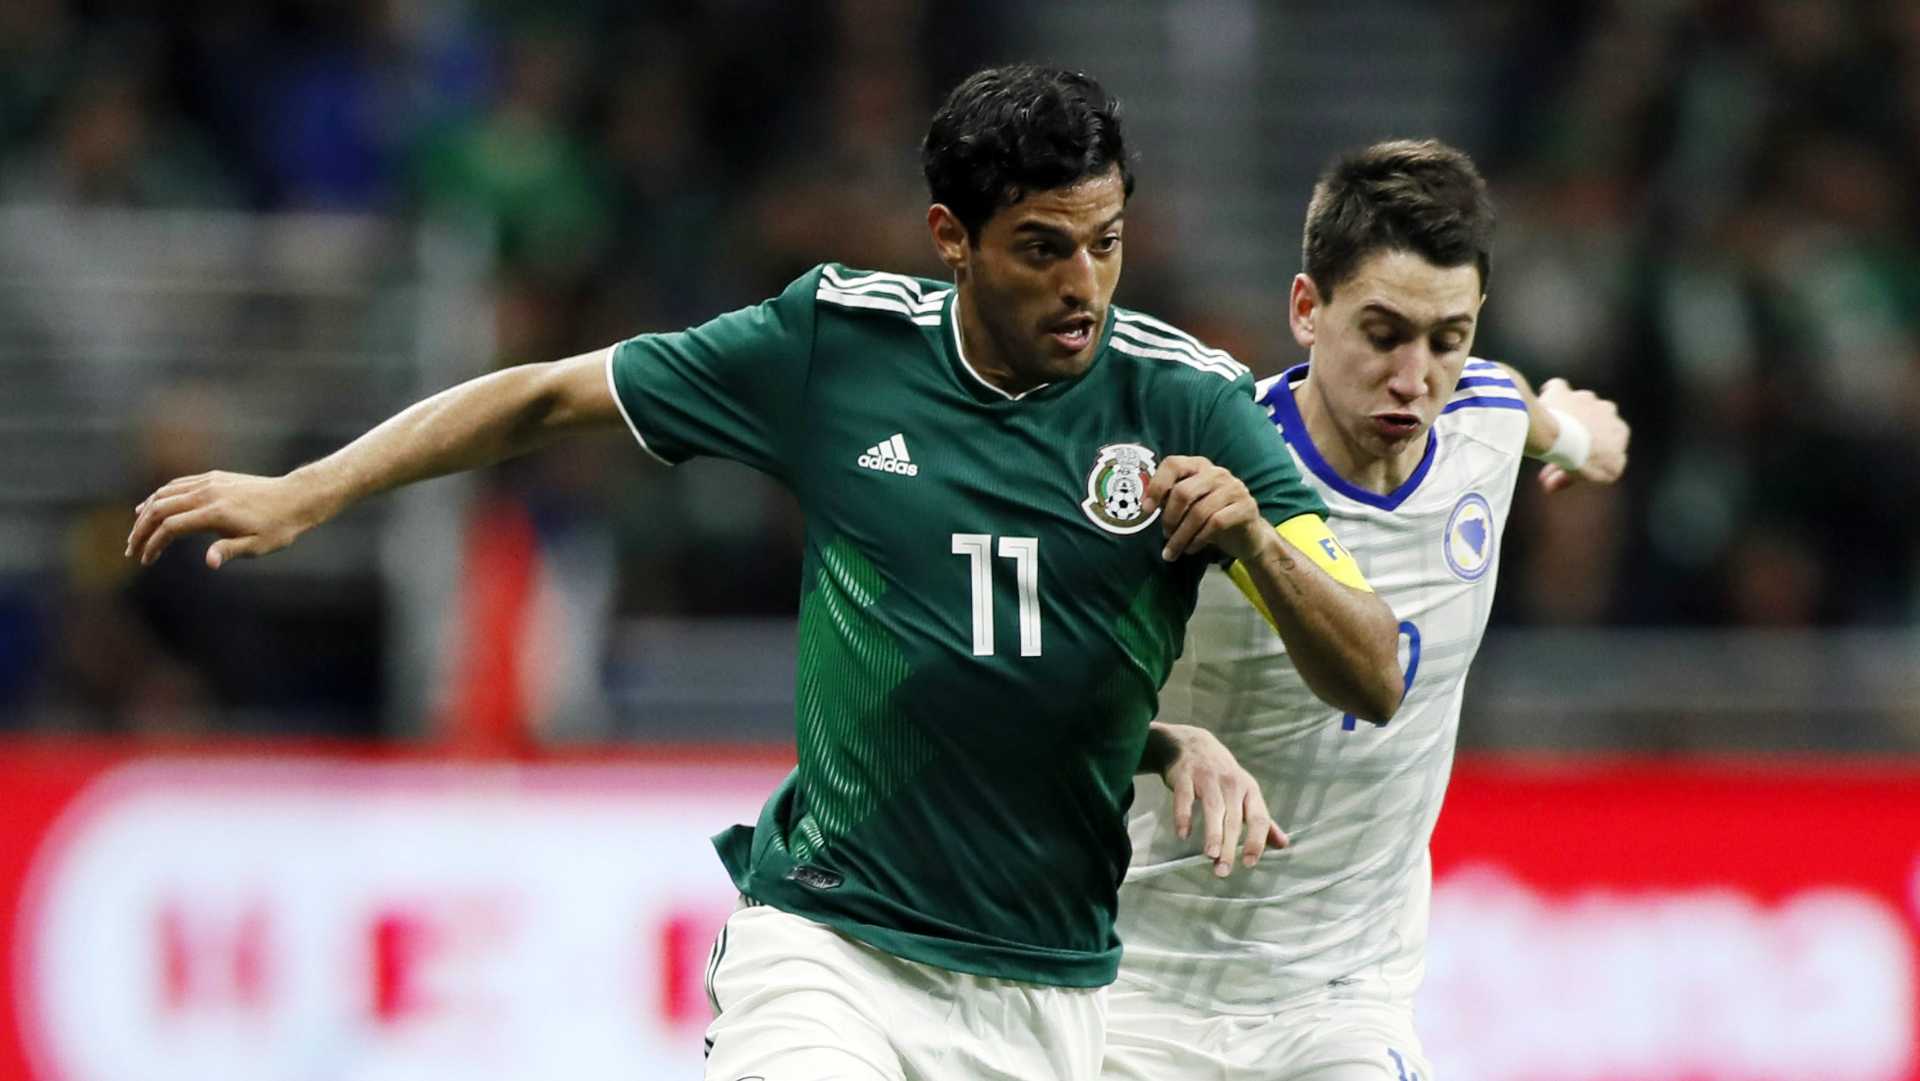 Mexico vs Iceland: Live stream, starting lineup, kickoff time & match preview | Goal.com1920 x 1081